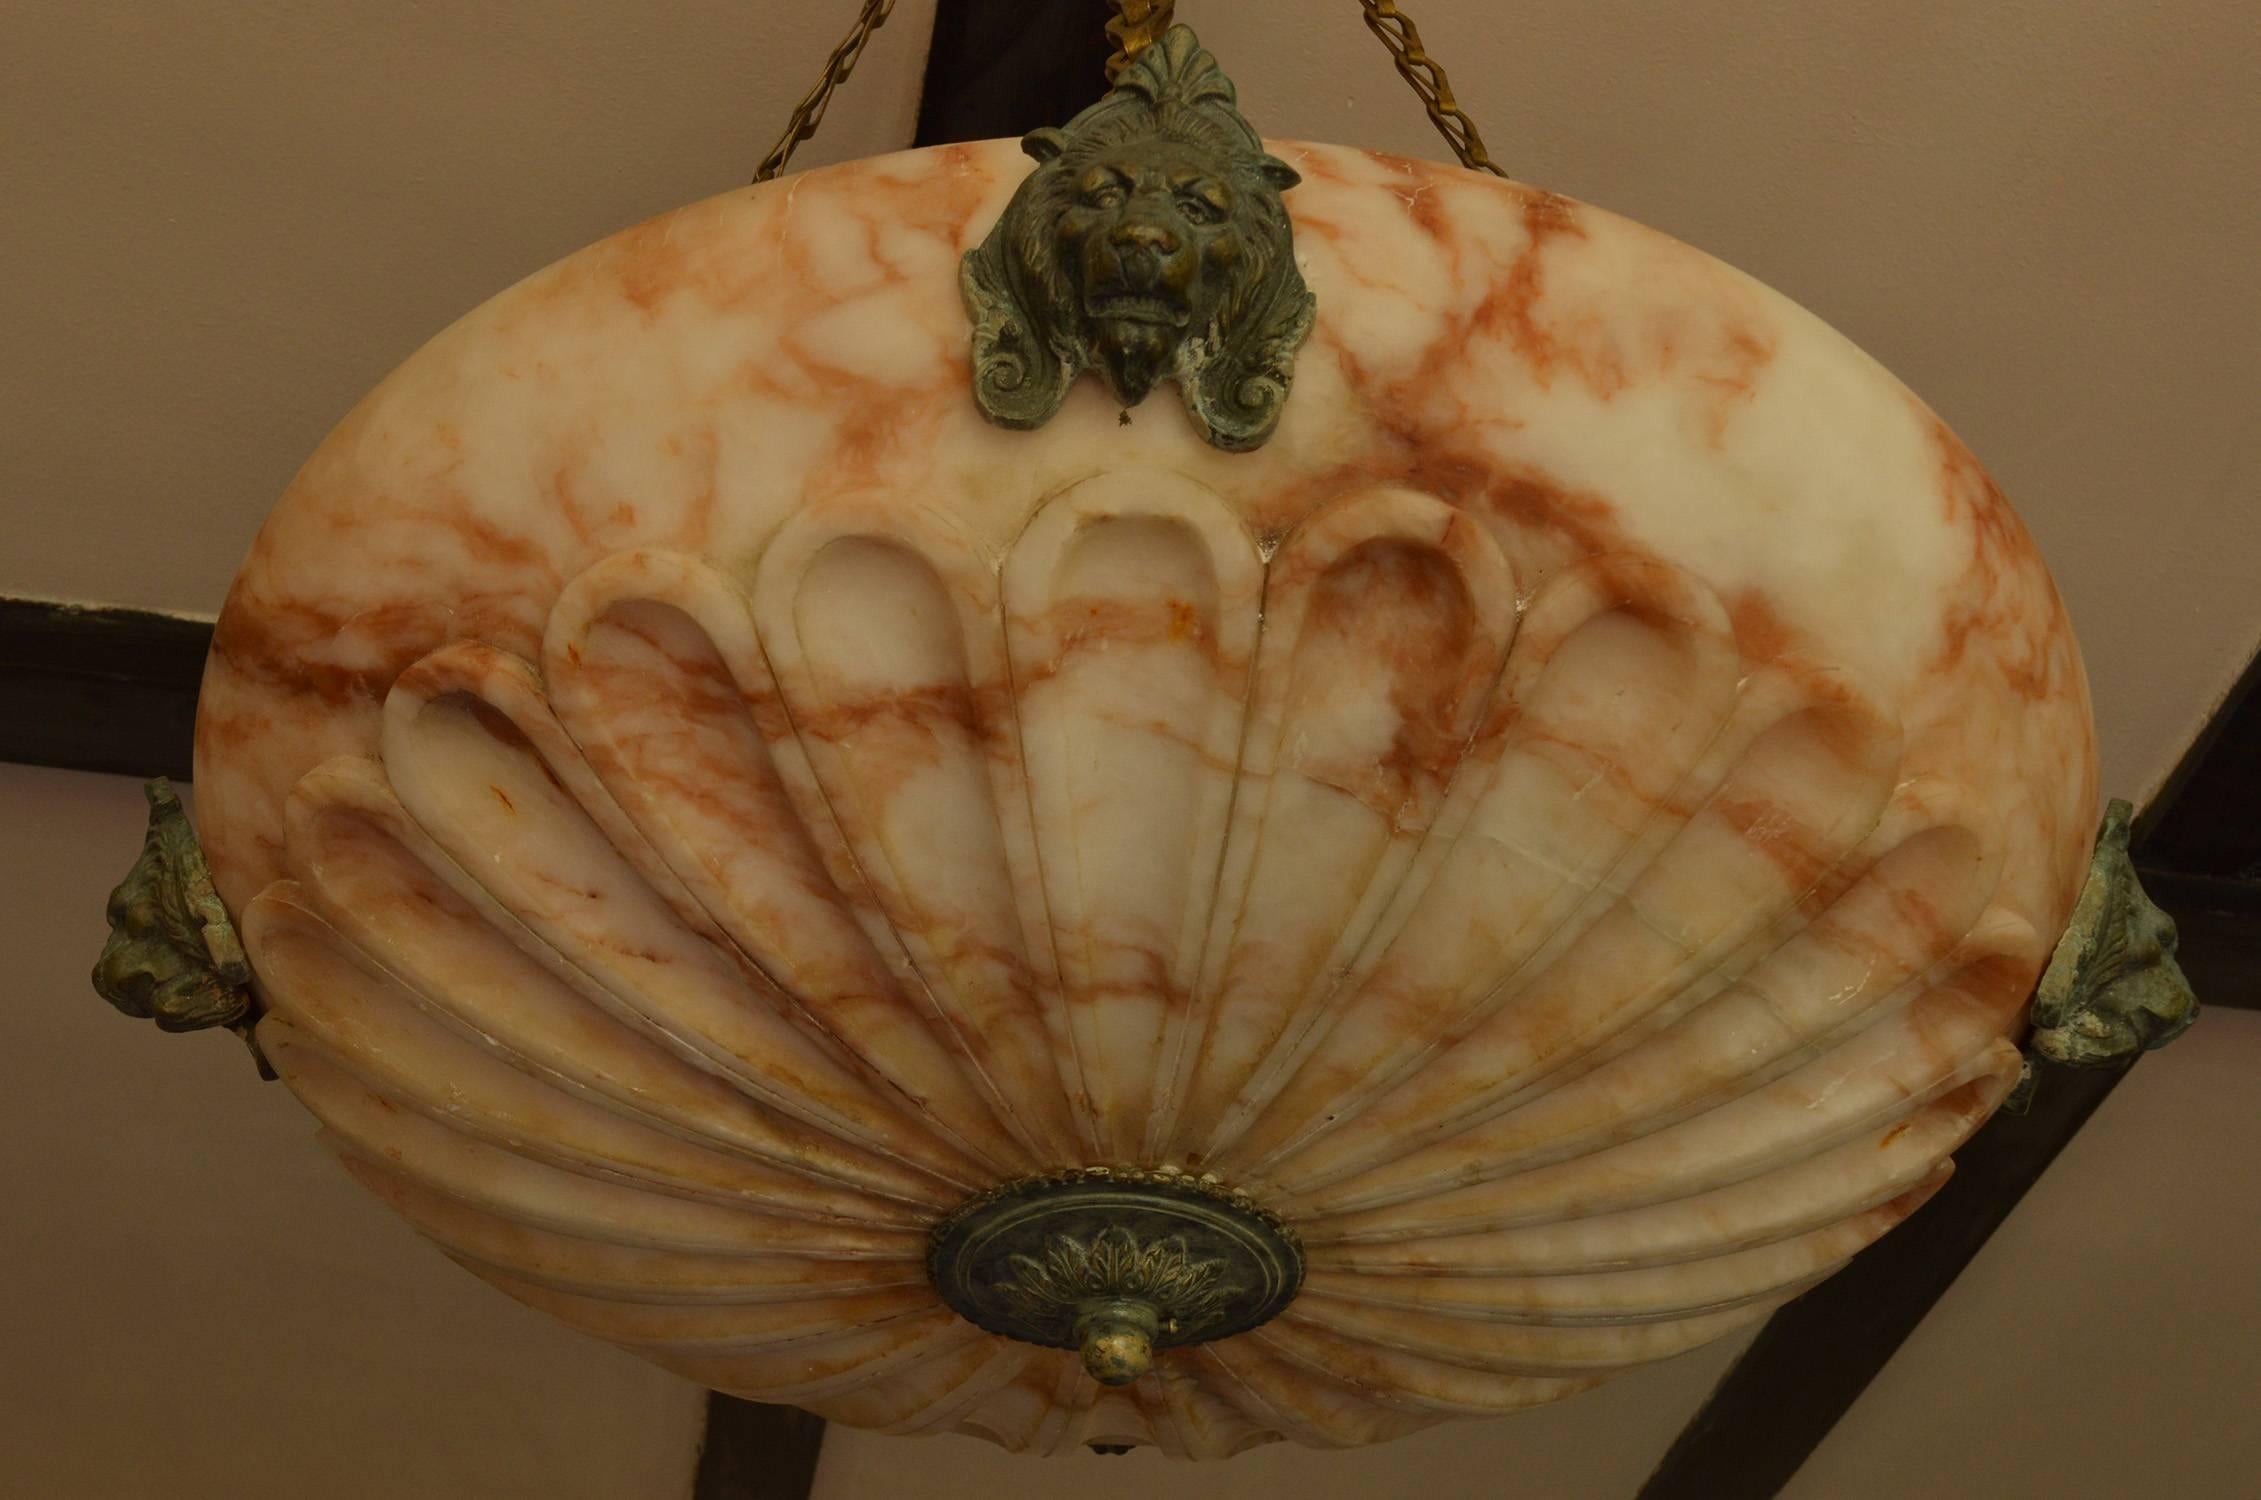 Brass Antique Carved Alabaster Chandelier in Greek Revival Style, English 19th Century